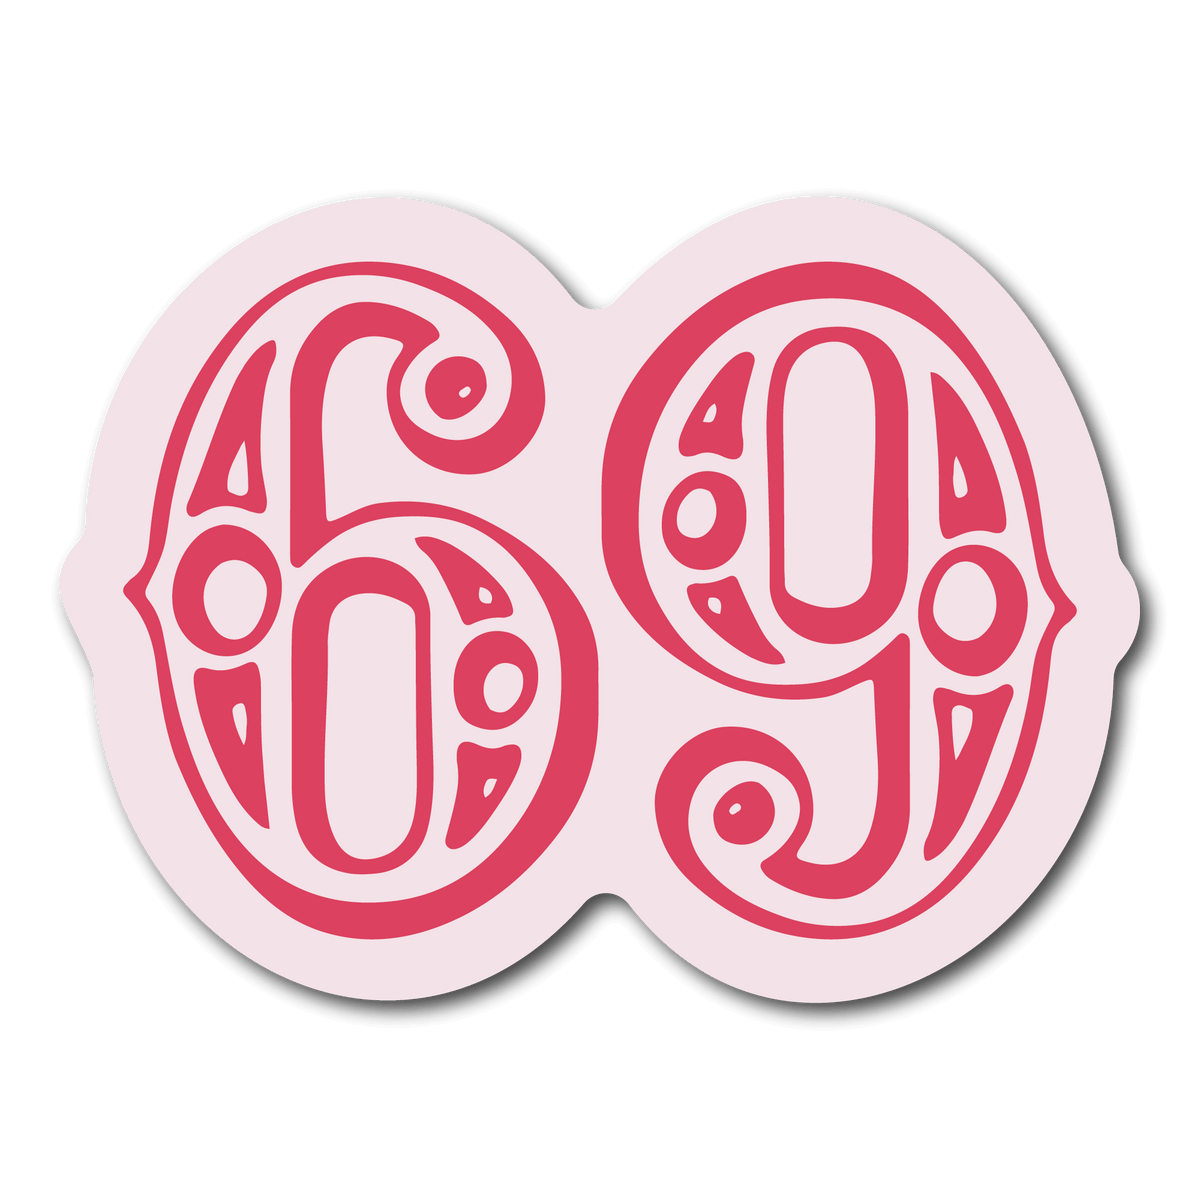 Small Pink waterproof Sticker of the number 69 for phone case or water bottle